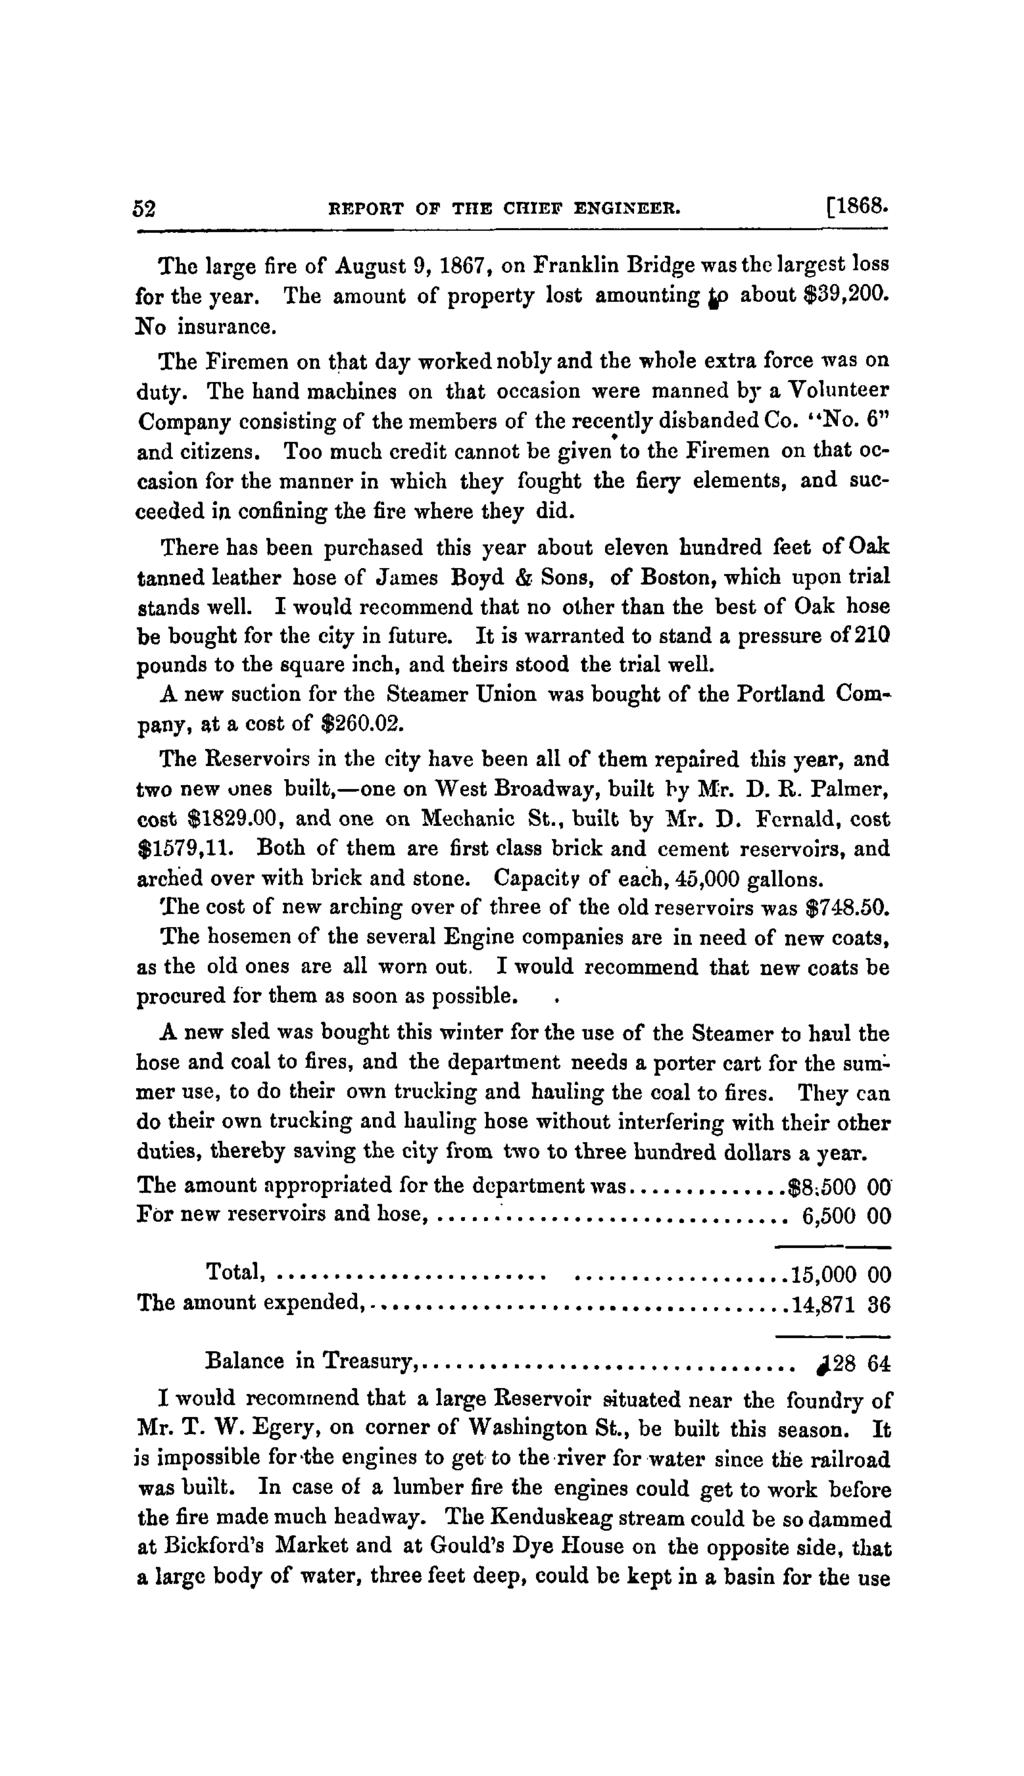 52 REPORT OF THE CHIEF ENGINEER. [1868. The large fire of August 9, 1867, on Franklin Bridge was the largest loss for the year. The amount of property lost amounting ty about $39,200. No insurance.